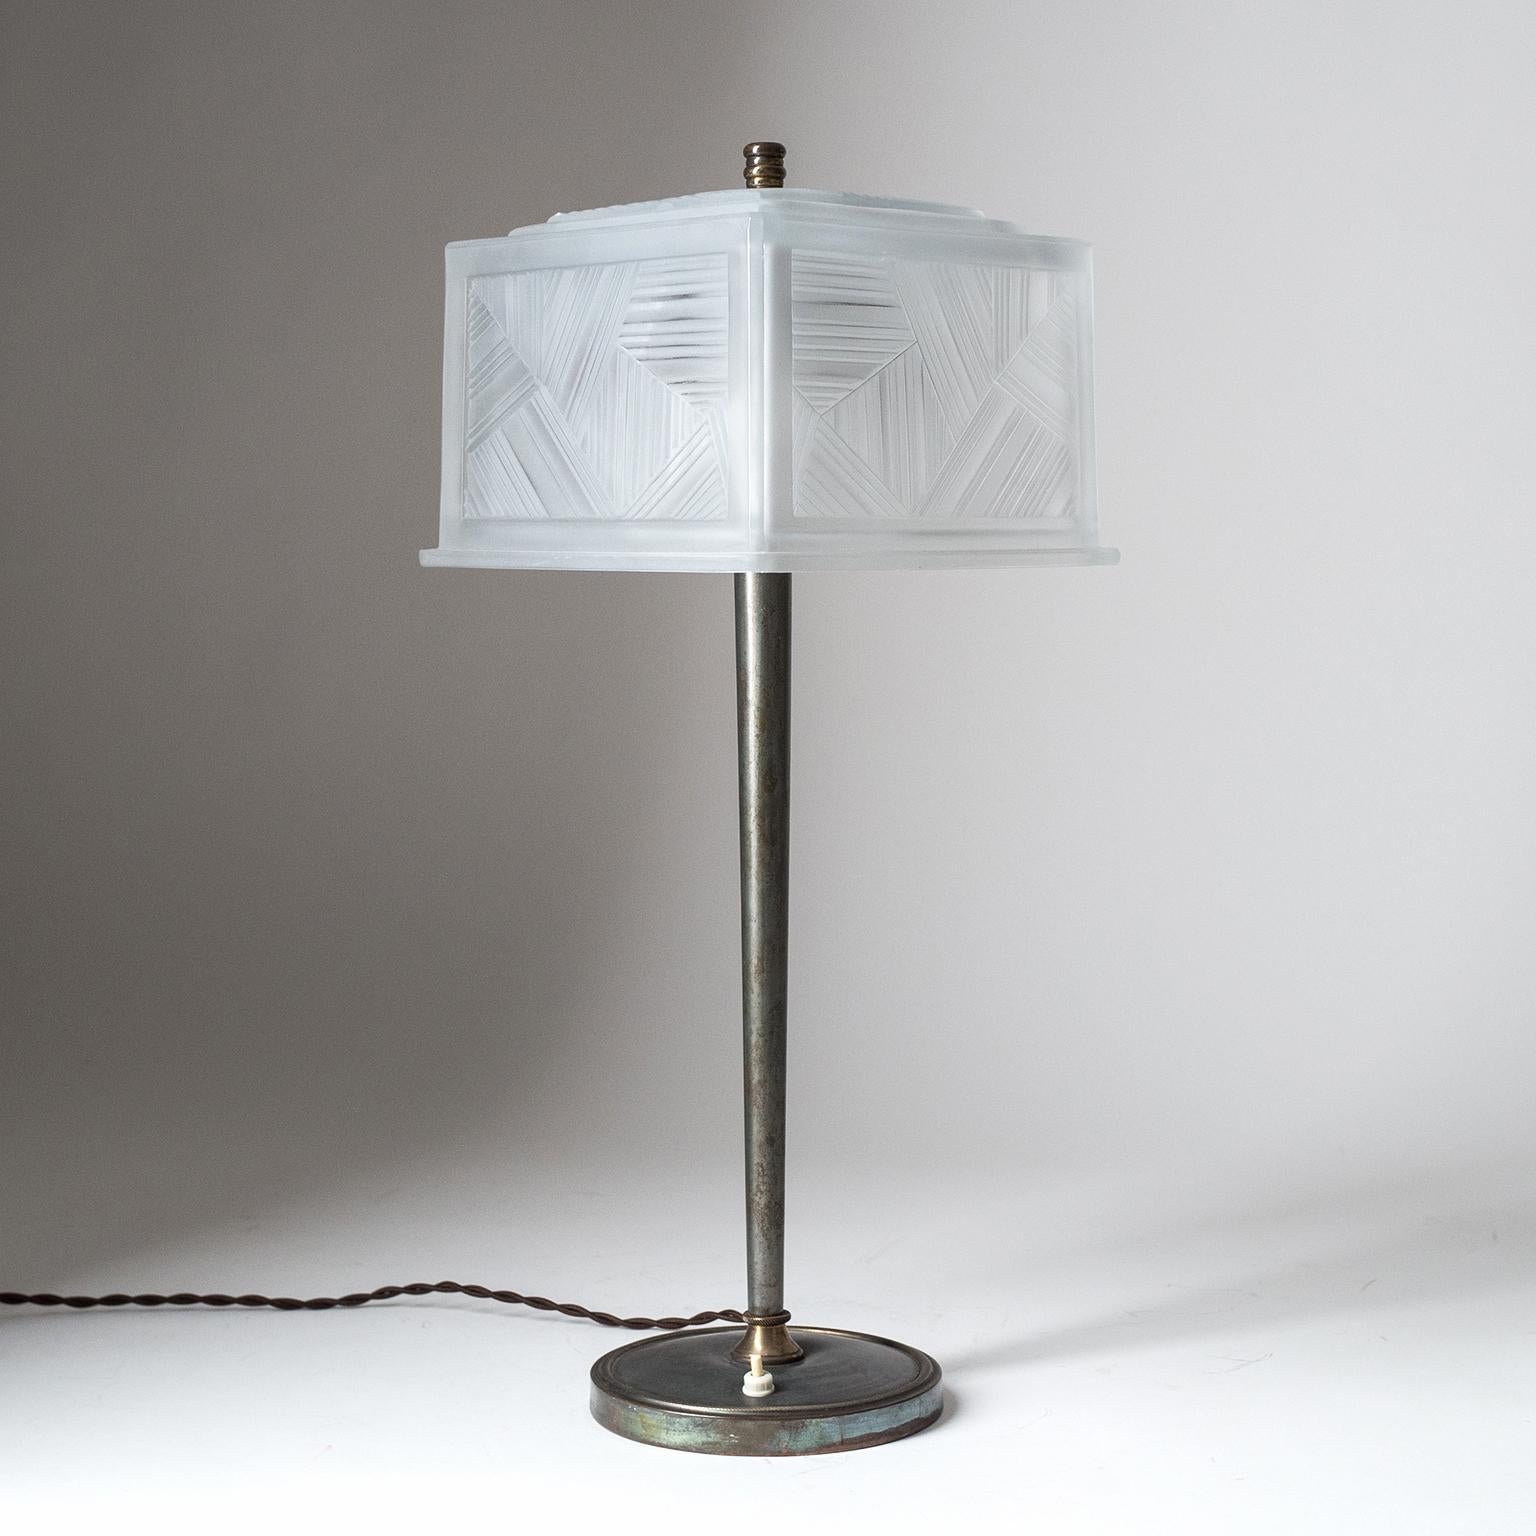 Very rare tall table lamp by Sabino, Paris, circa 1930. Slender, dark patinated, hardware with a heavily textured glass shade. Very thick glass with geometric pattern and a satin finish. Very good original condition with two brass and ceramic E27